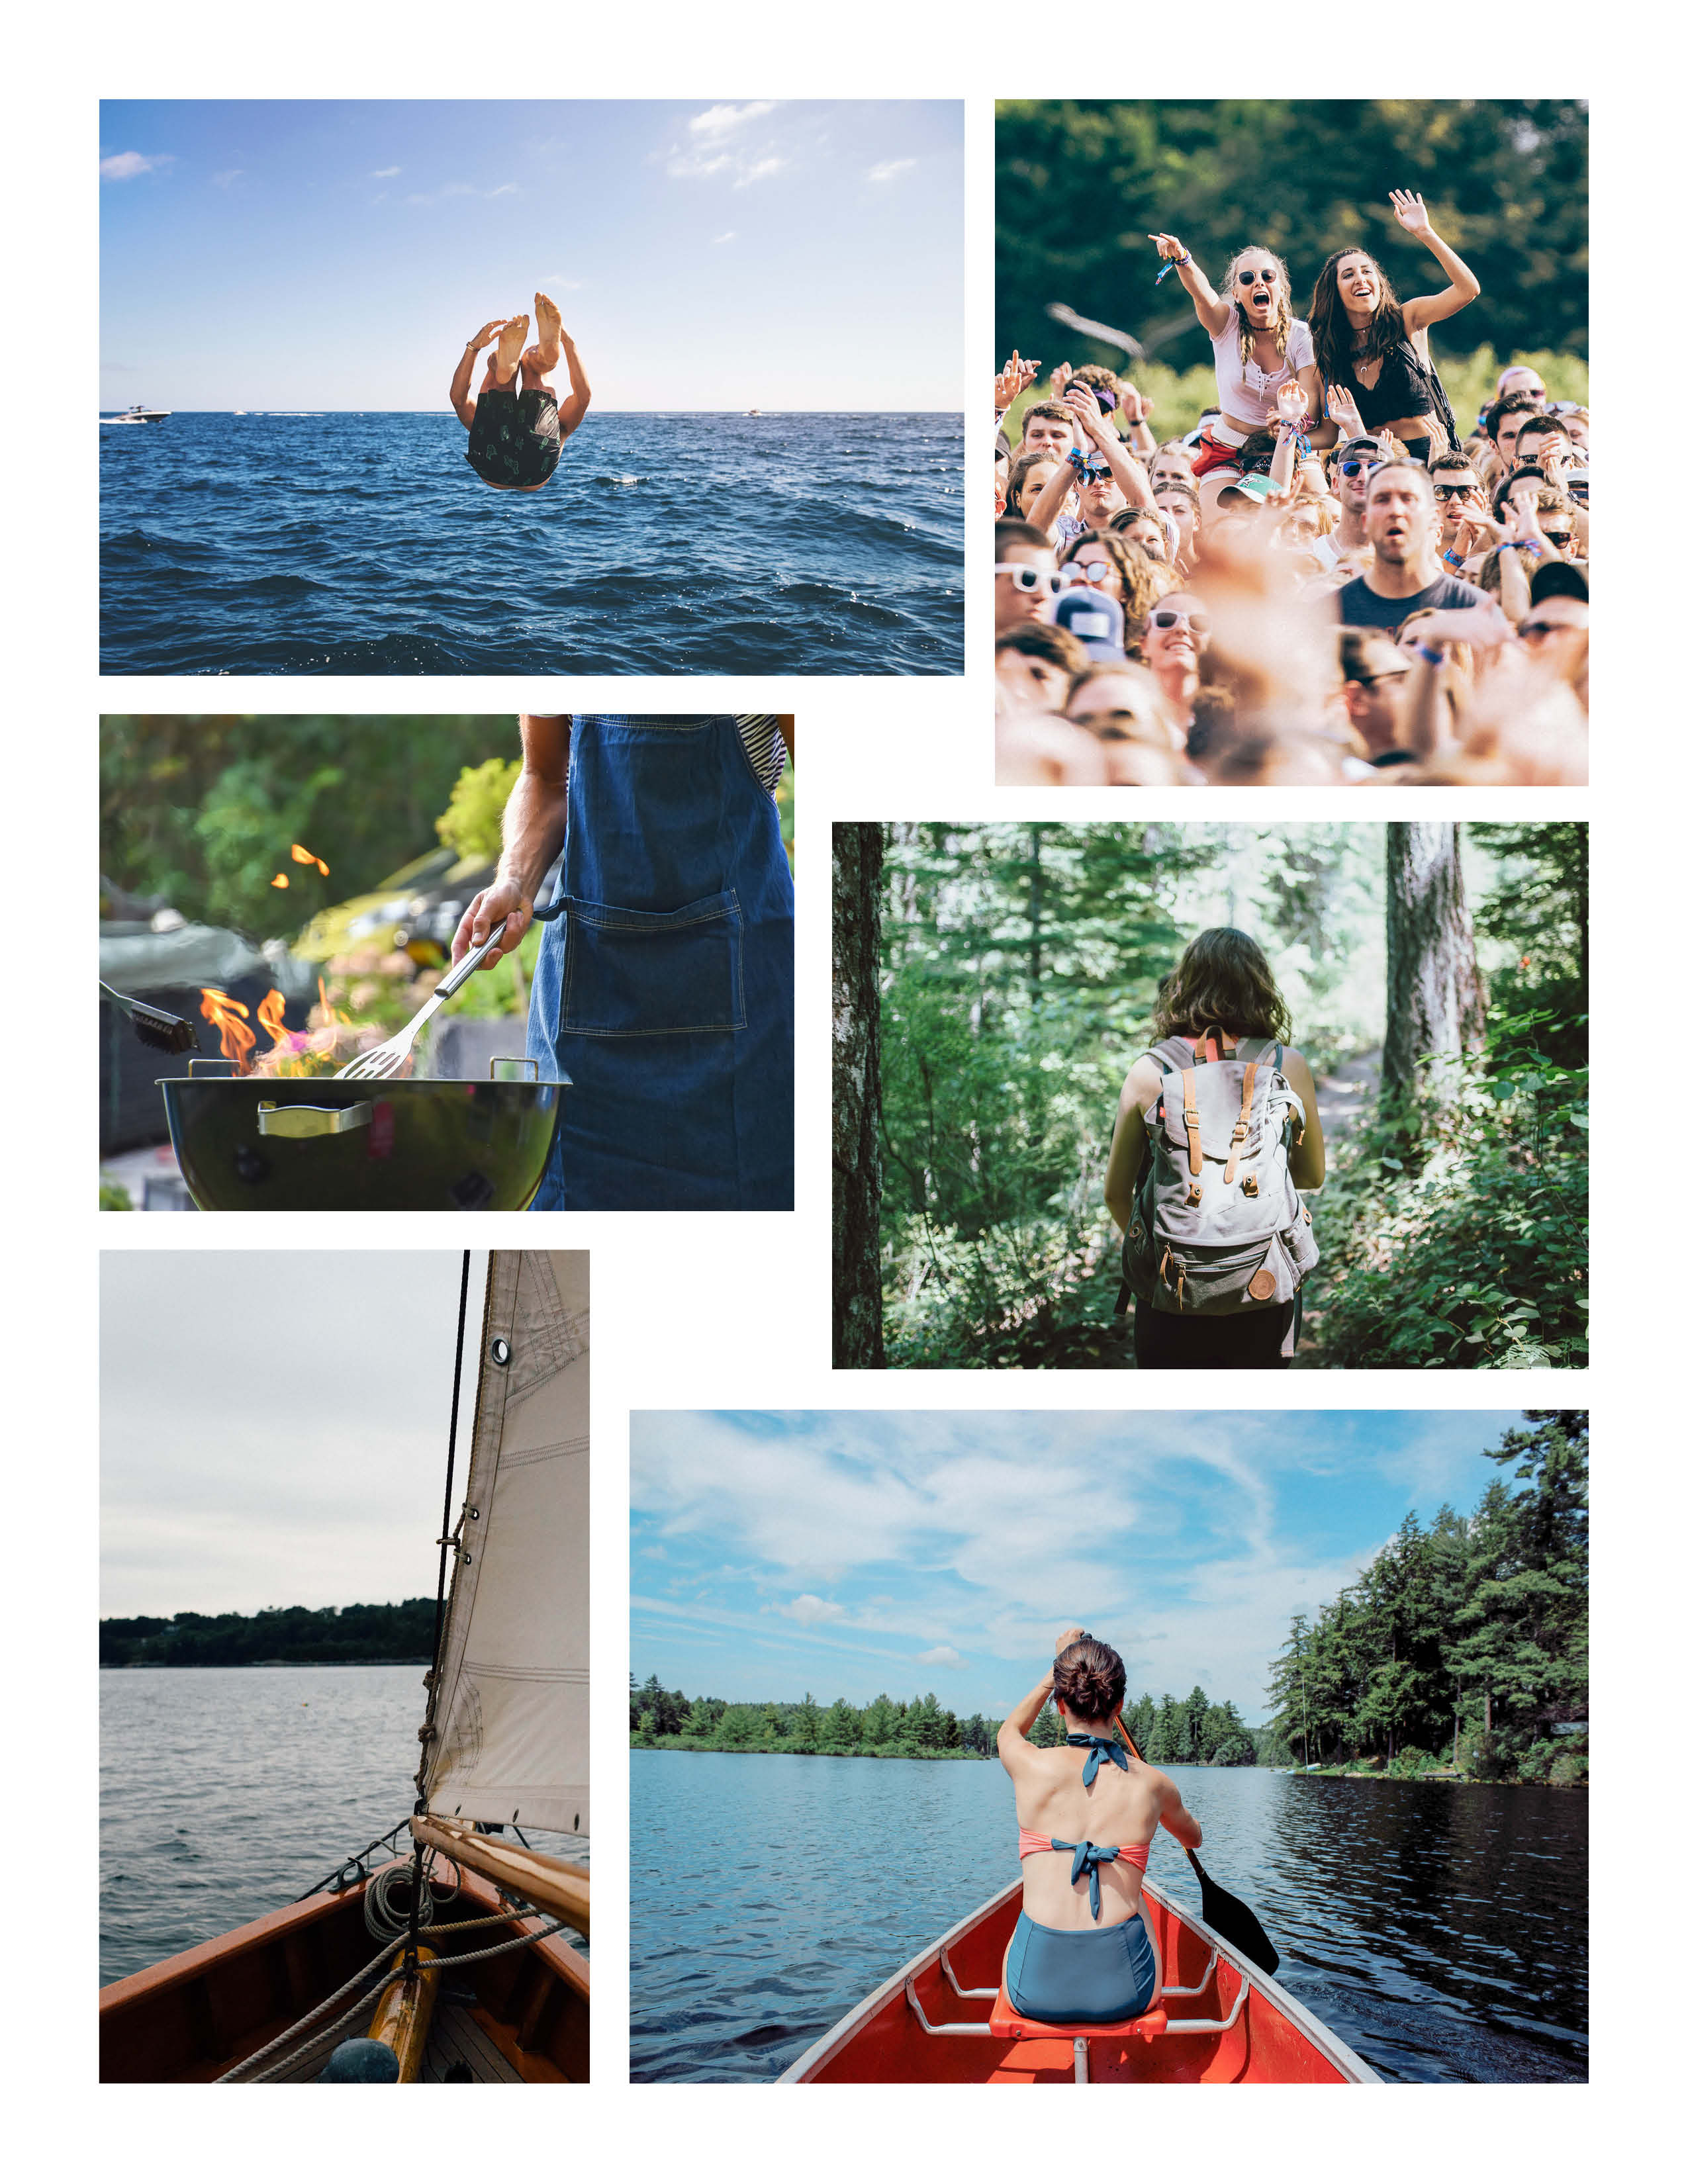 six picture collage of outdoor adventures and fun